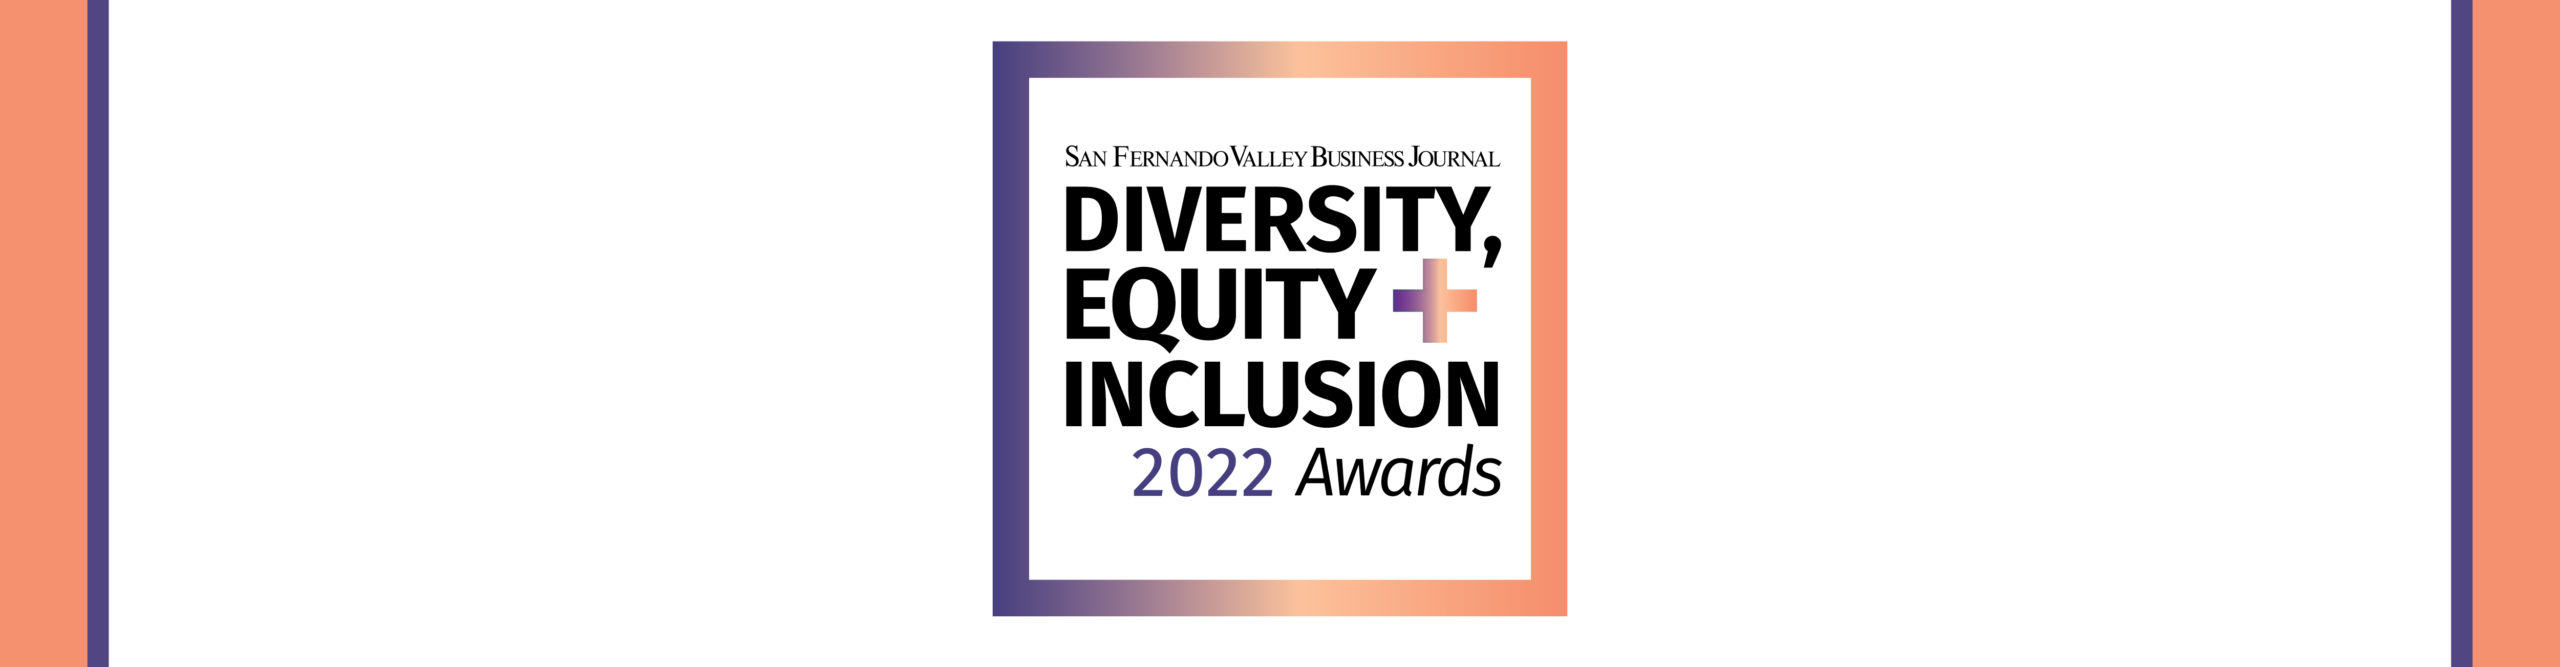 Diversity, Equity + Inclusion new banner